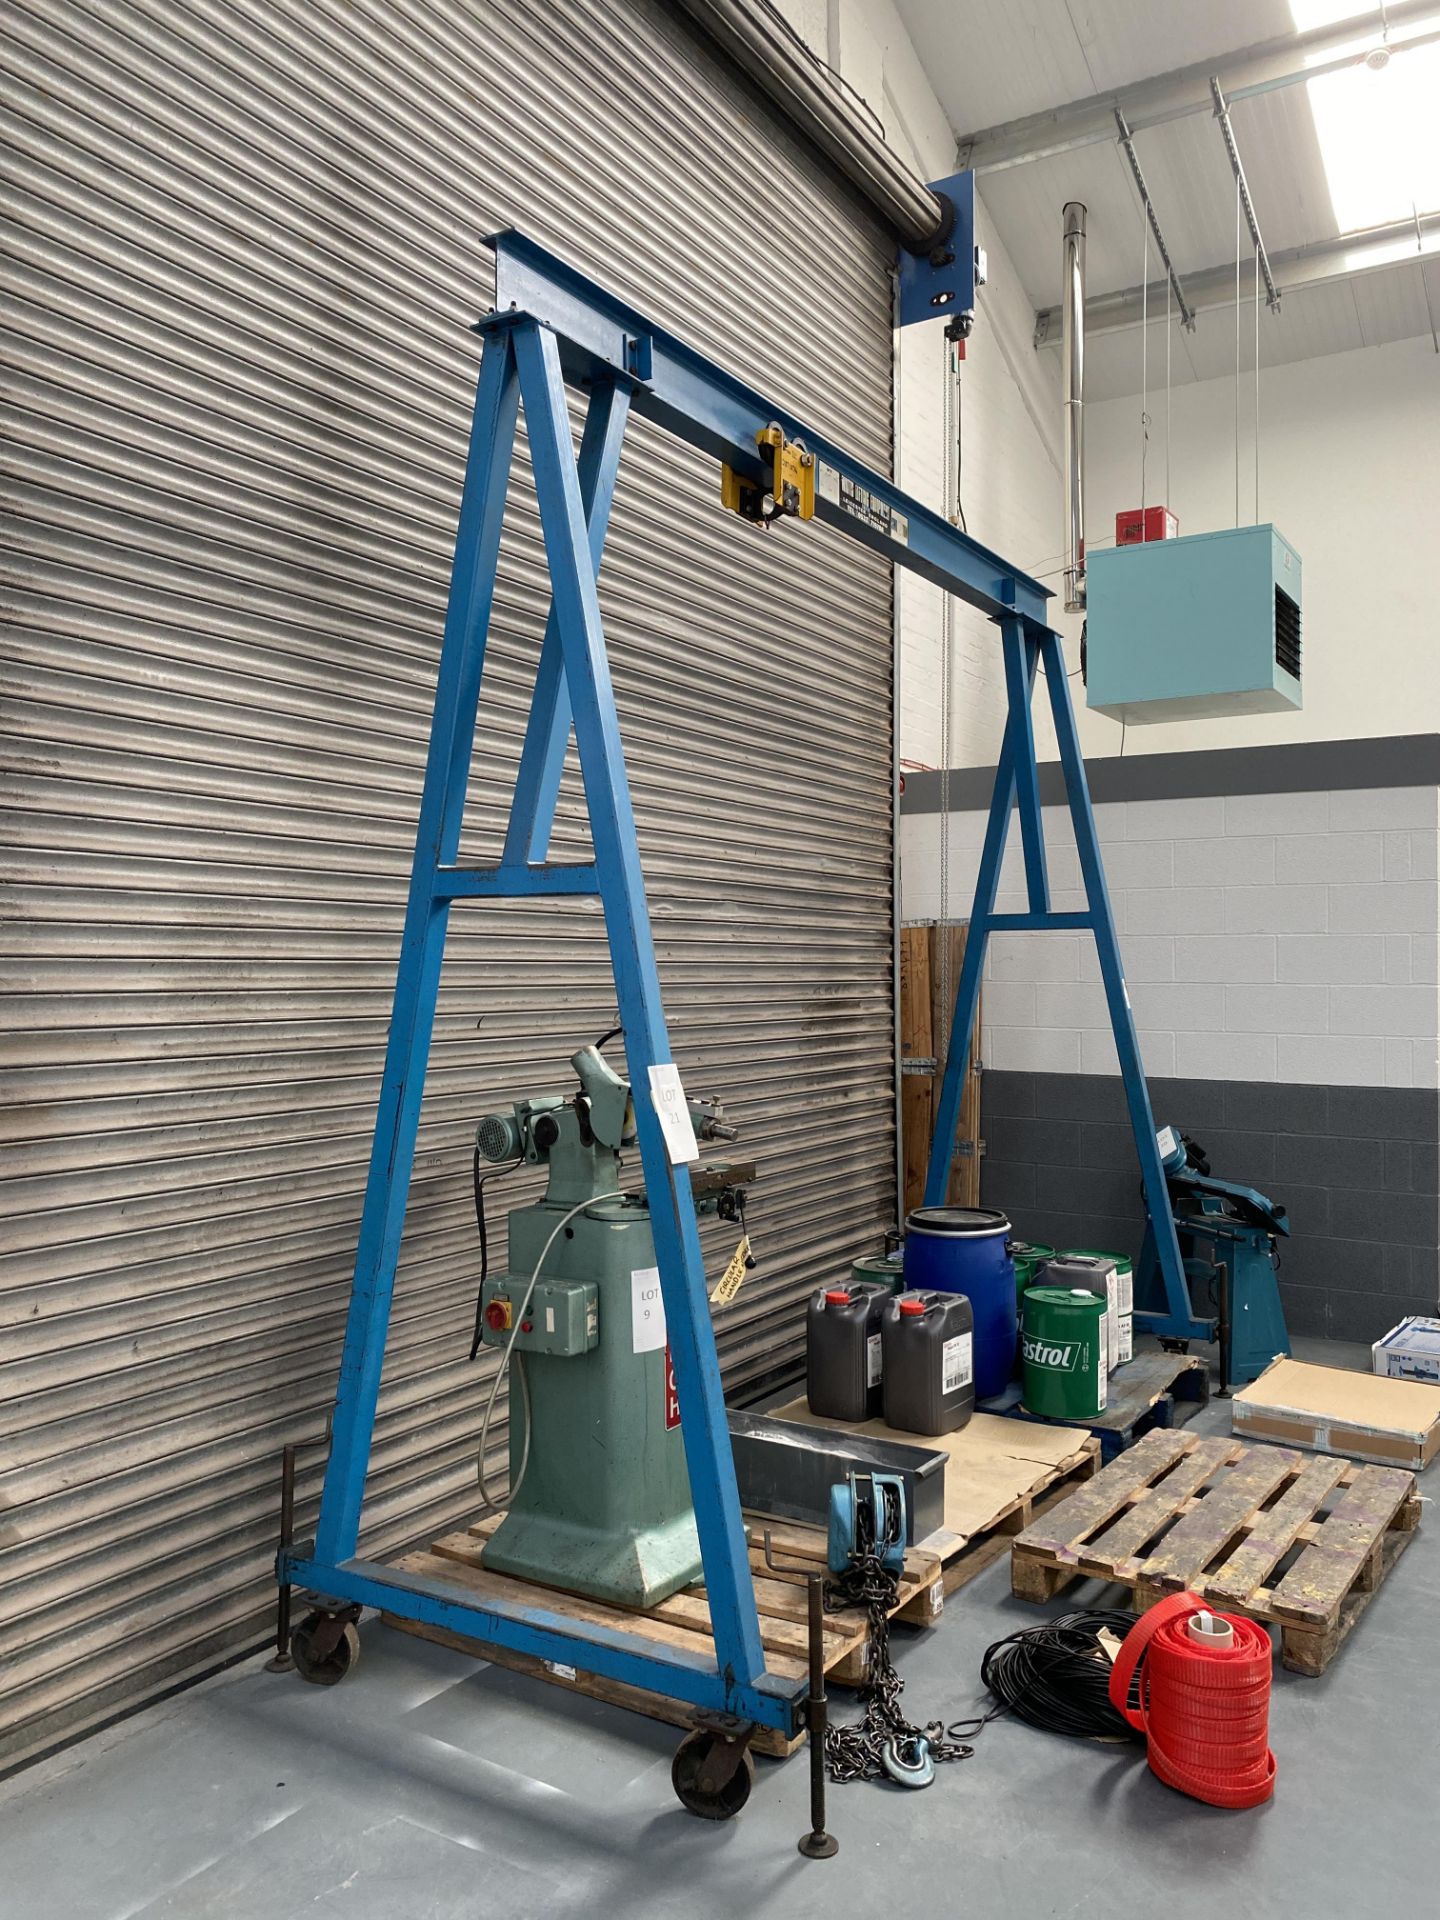 Watts Lifting Equipment, A Frame Lifting Gantry, SWL 2 Tons with chain hoist - Image 6 of 12